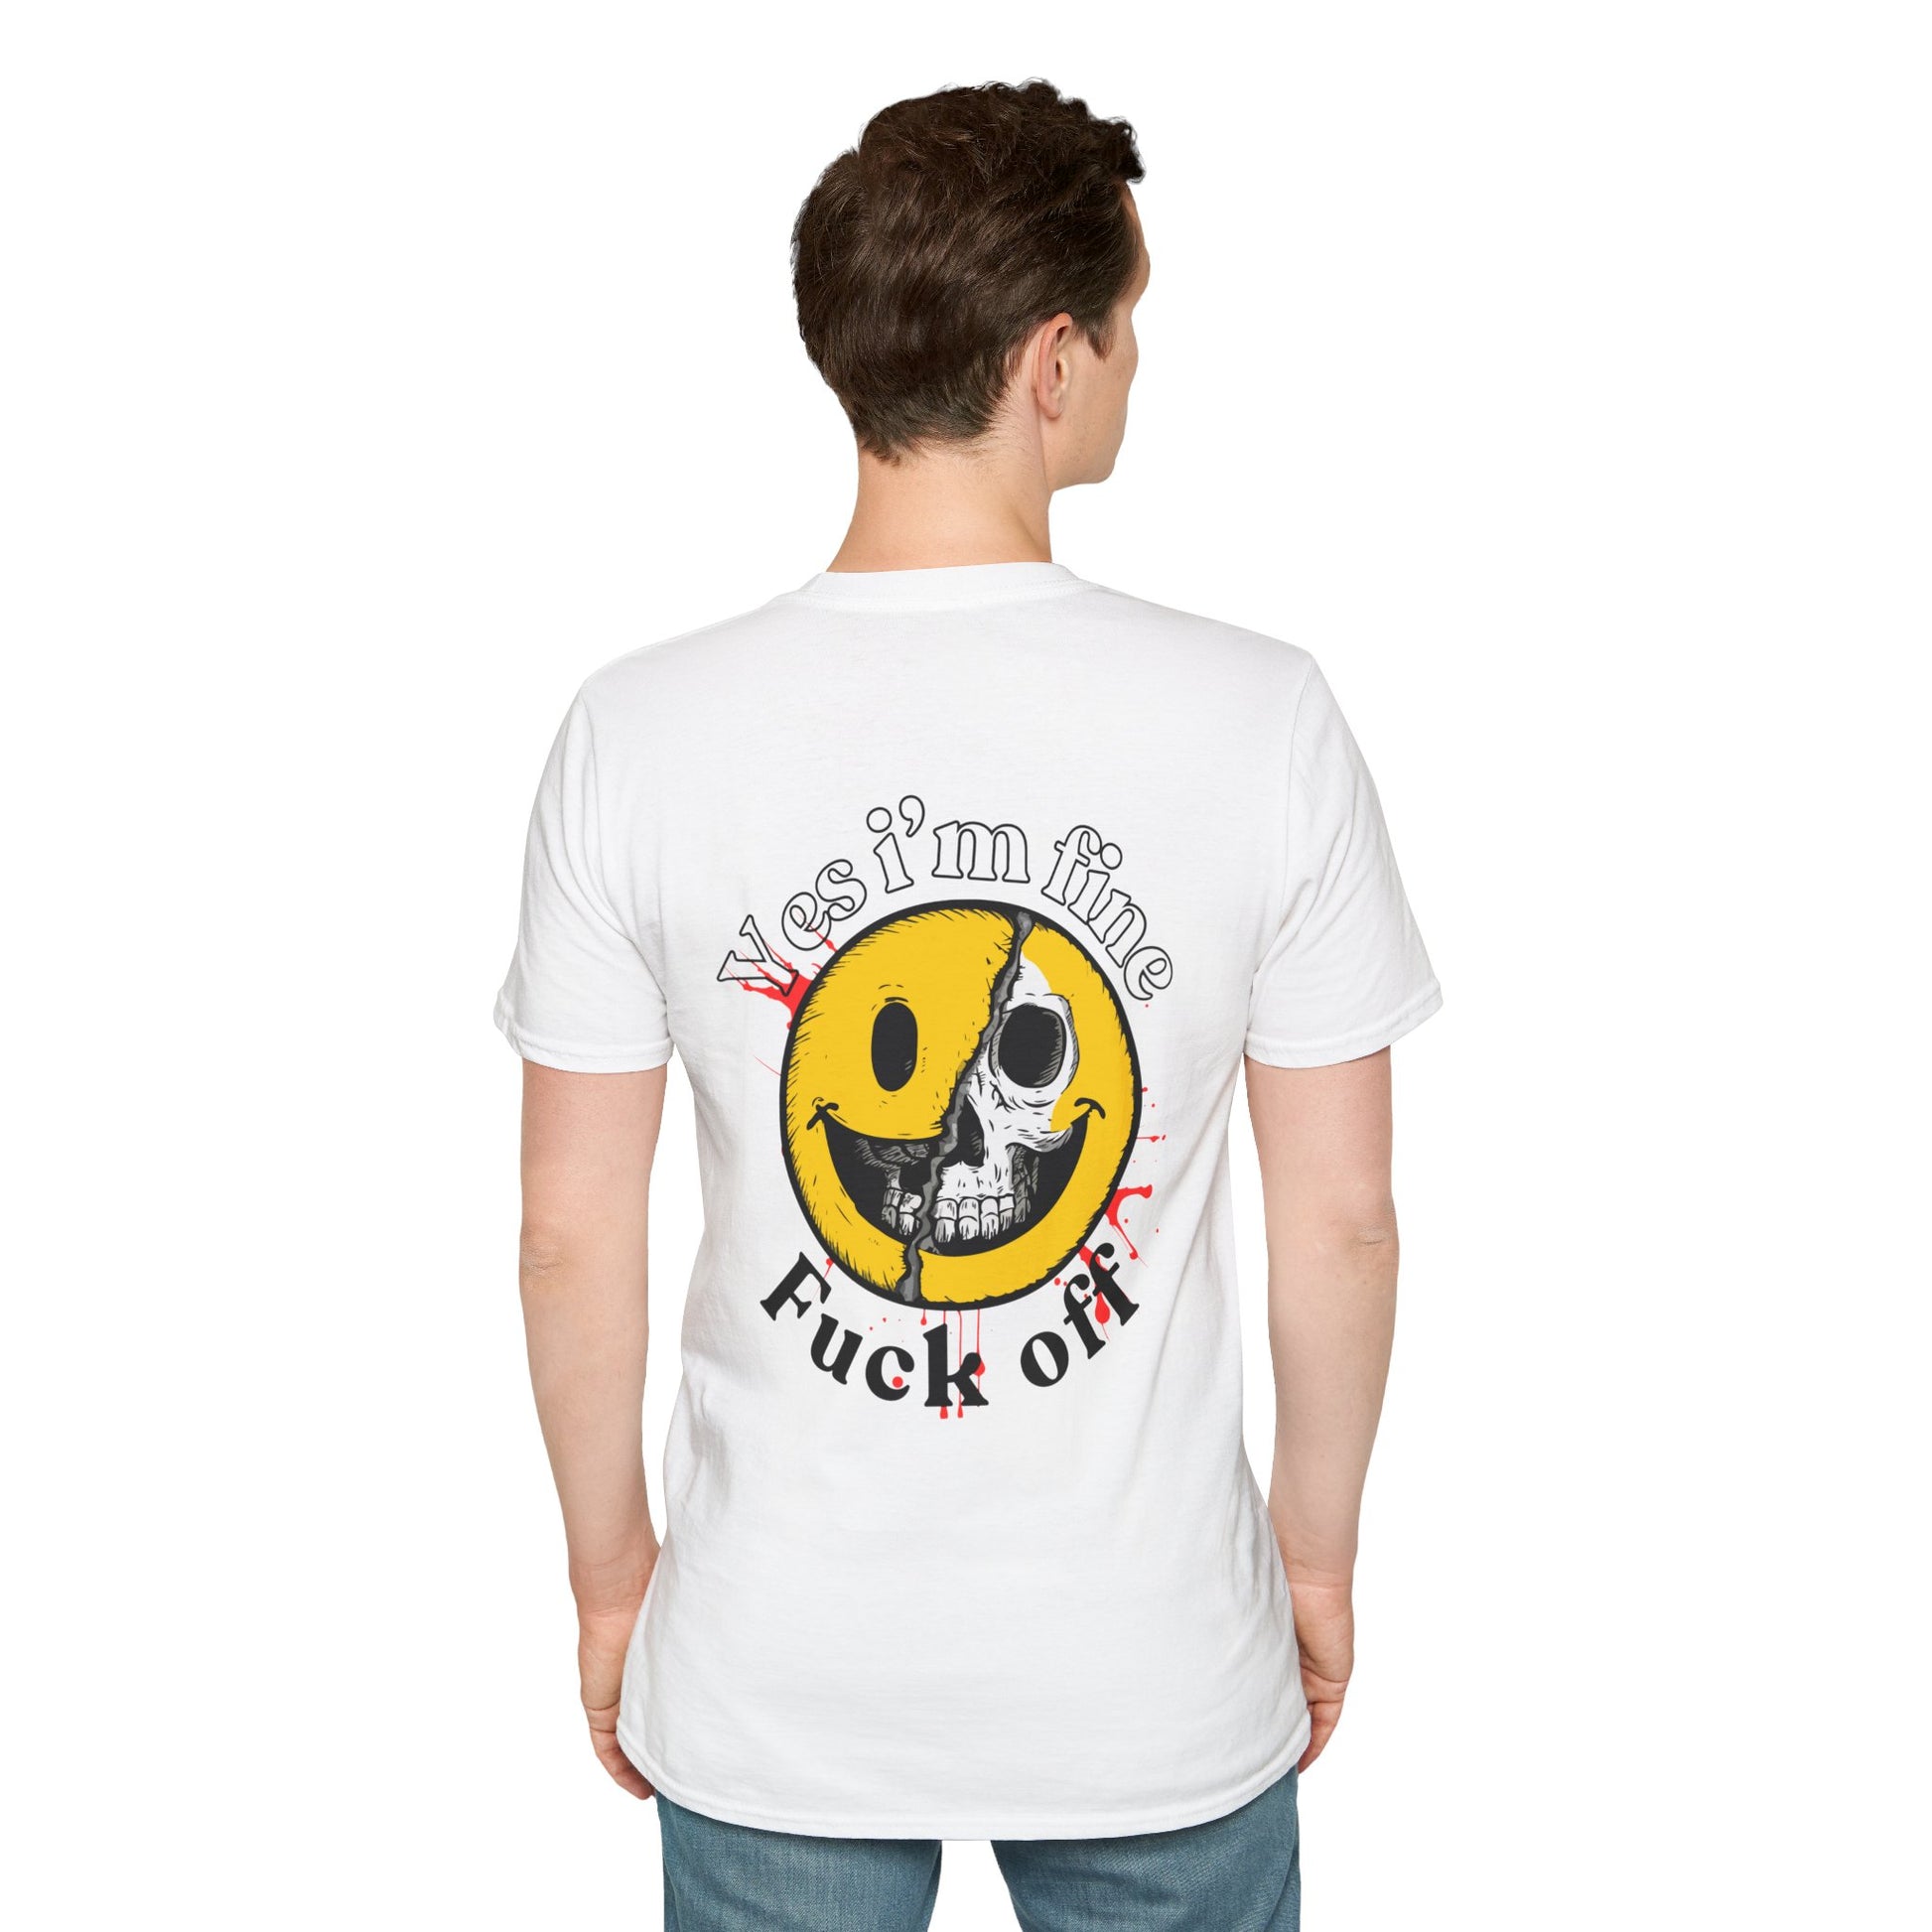 White T-shirt with a half smiley, half skull design and bold text 'Yes I'm Fine' and 'Fuck Off' 